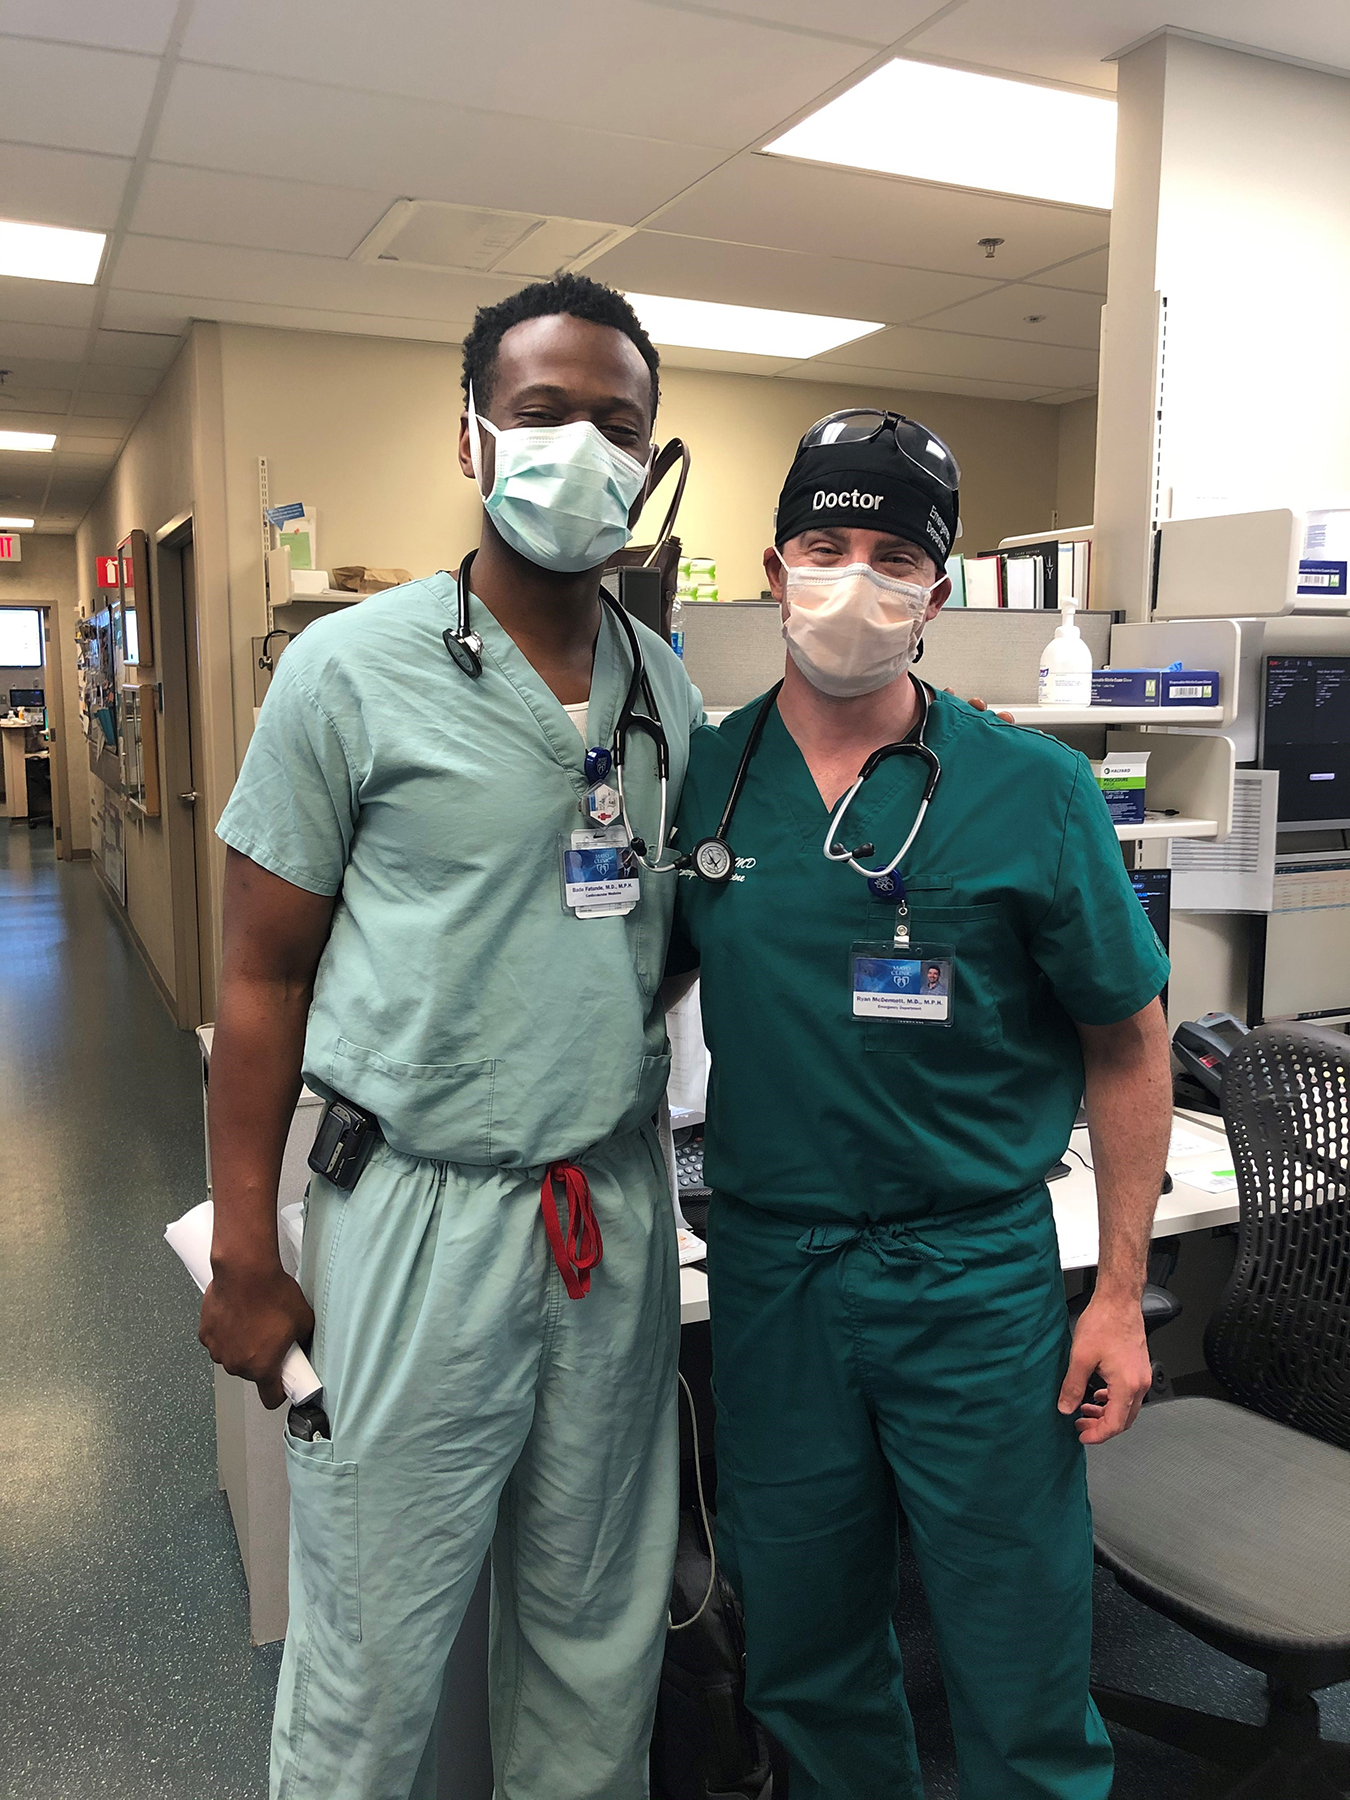 MPH classmates Bade Fatunde (left) and Ryan McDermott (right) from the class of 2008, ran into each other in the Mayo Clinic Arizona ED.